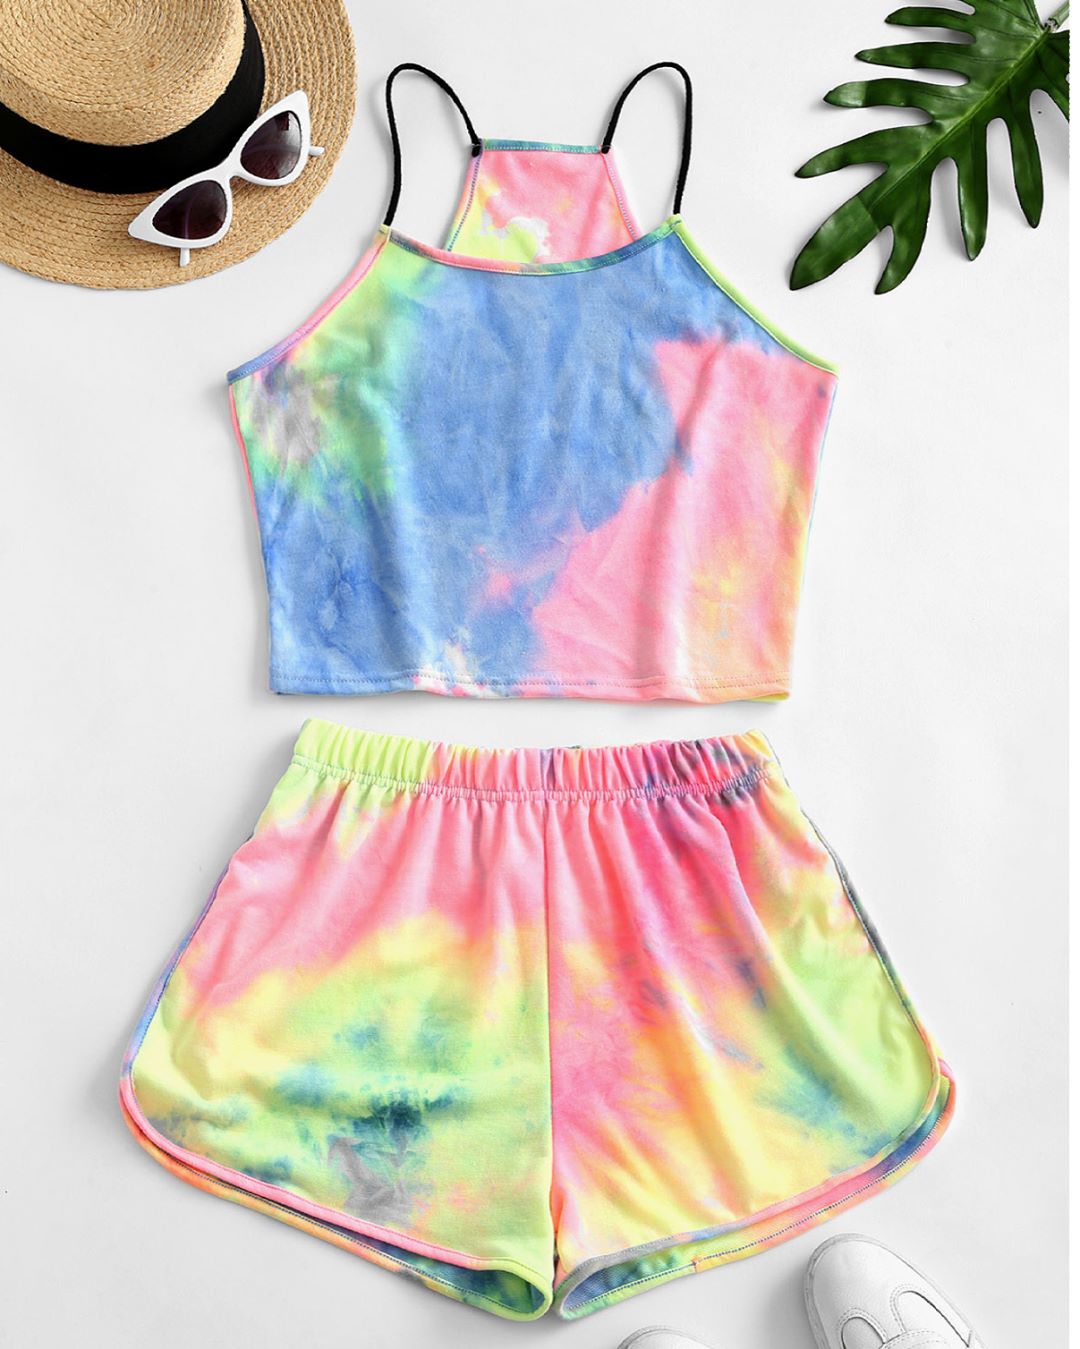 ZAFUL.com - We're loving tie dye in summer. Tap to shop or shop via the 🔗 in bio.⁣⁣⁣⁣⁣⁣⁣⁣⁣⁣⁣⁣⁣⁣
.⁣⁣⁣⁣⁣⁣⁣⁣⁣⁣⁣⁣⁣⁣
⁣⁣⁣⁣⁣⁣⁣⁣⁣⁣⁣⁣⁣⁣
Search ID: 468022004⁣
⁣⁣⁣⁣⁣⁣
.⁣⁣⁣⁣⁣⁣⁣⁣⁣⁣⁣⁣⁣⁣
⚡Discount code: PZF520 (18%...